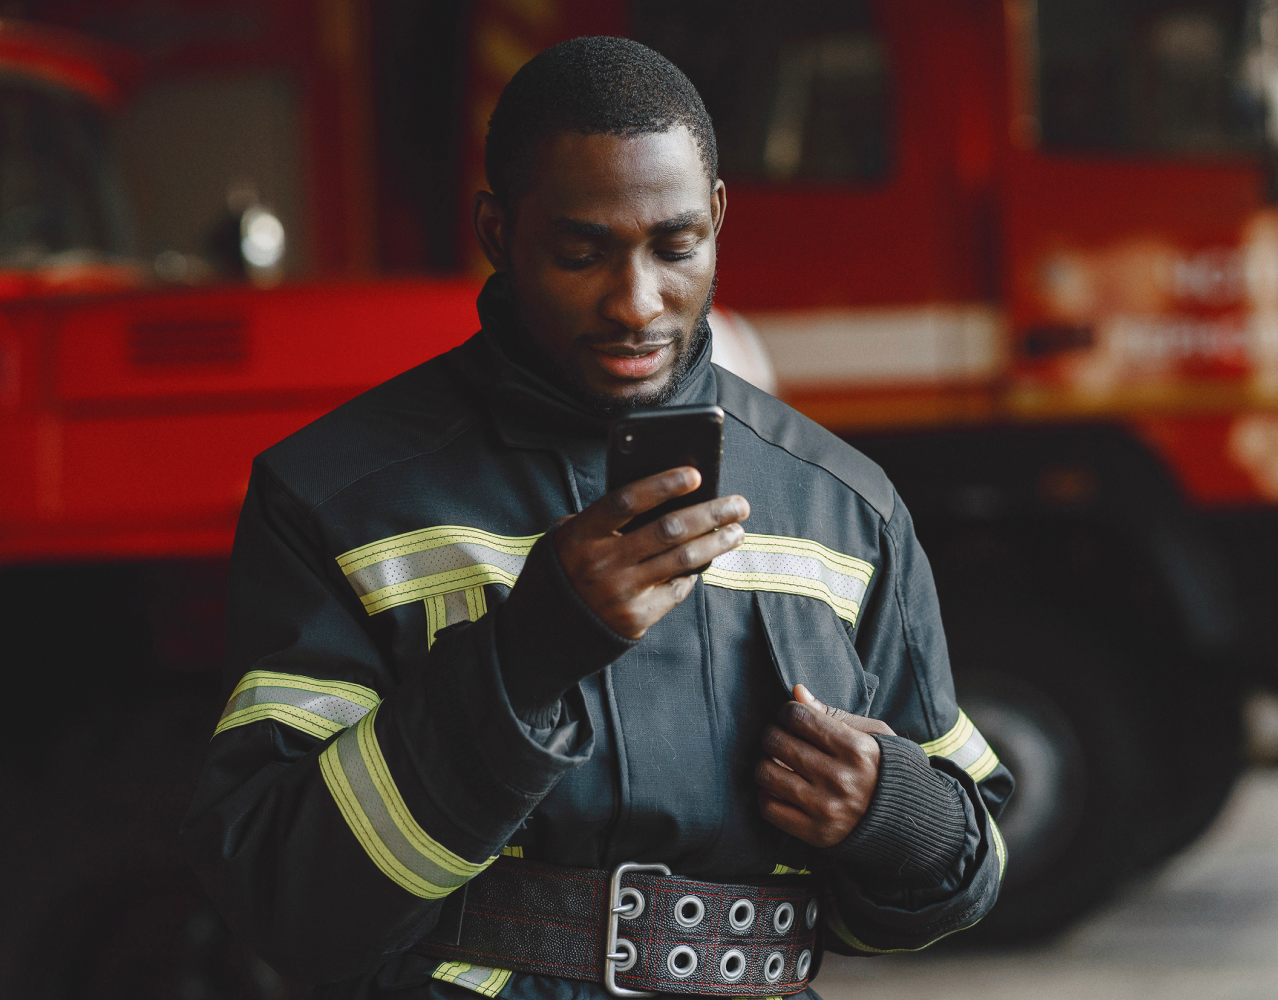 firefighter in uniform looking at his phone